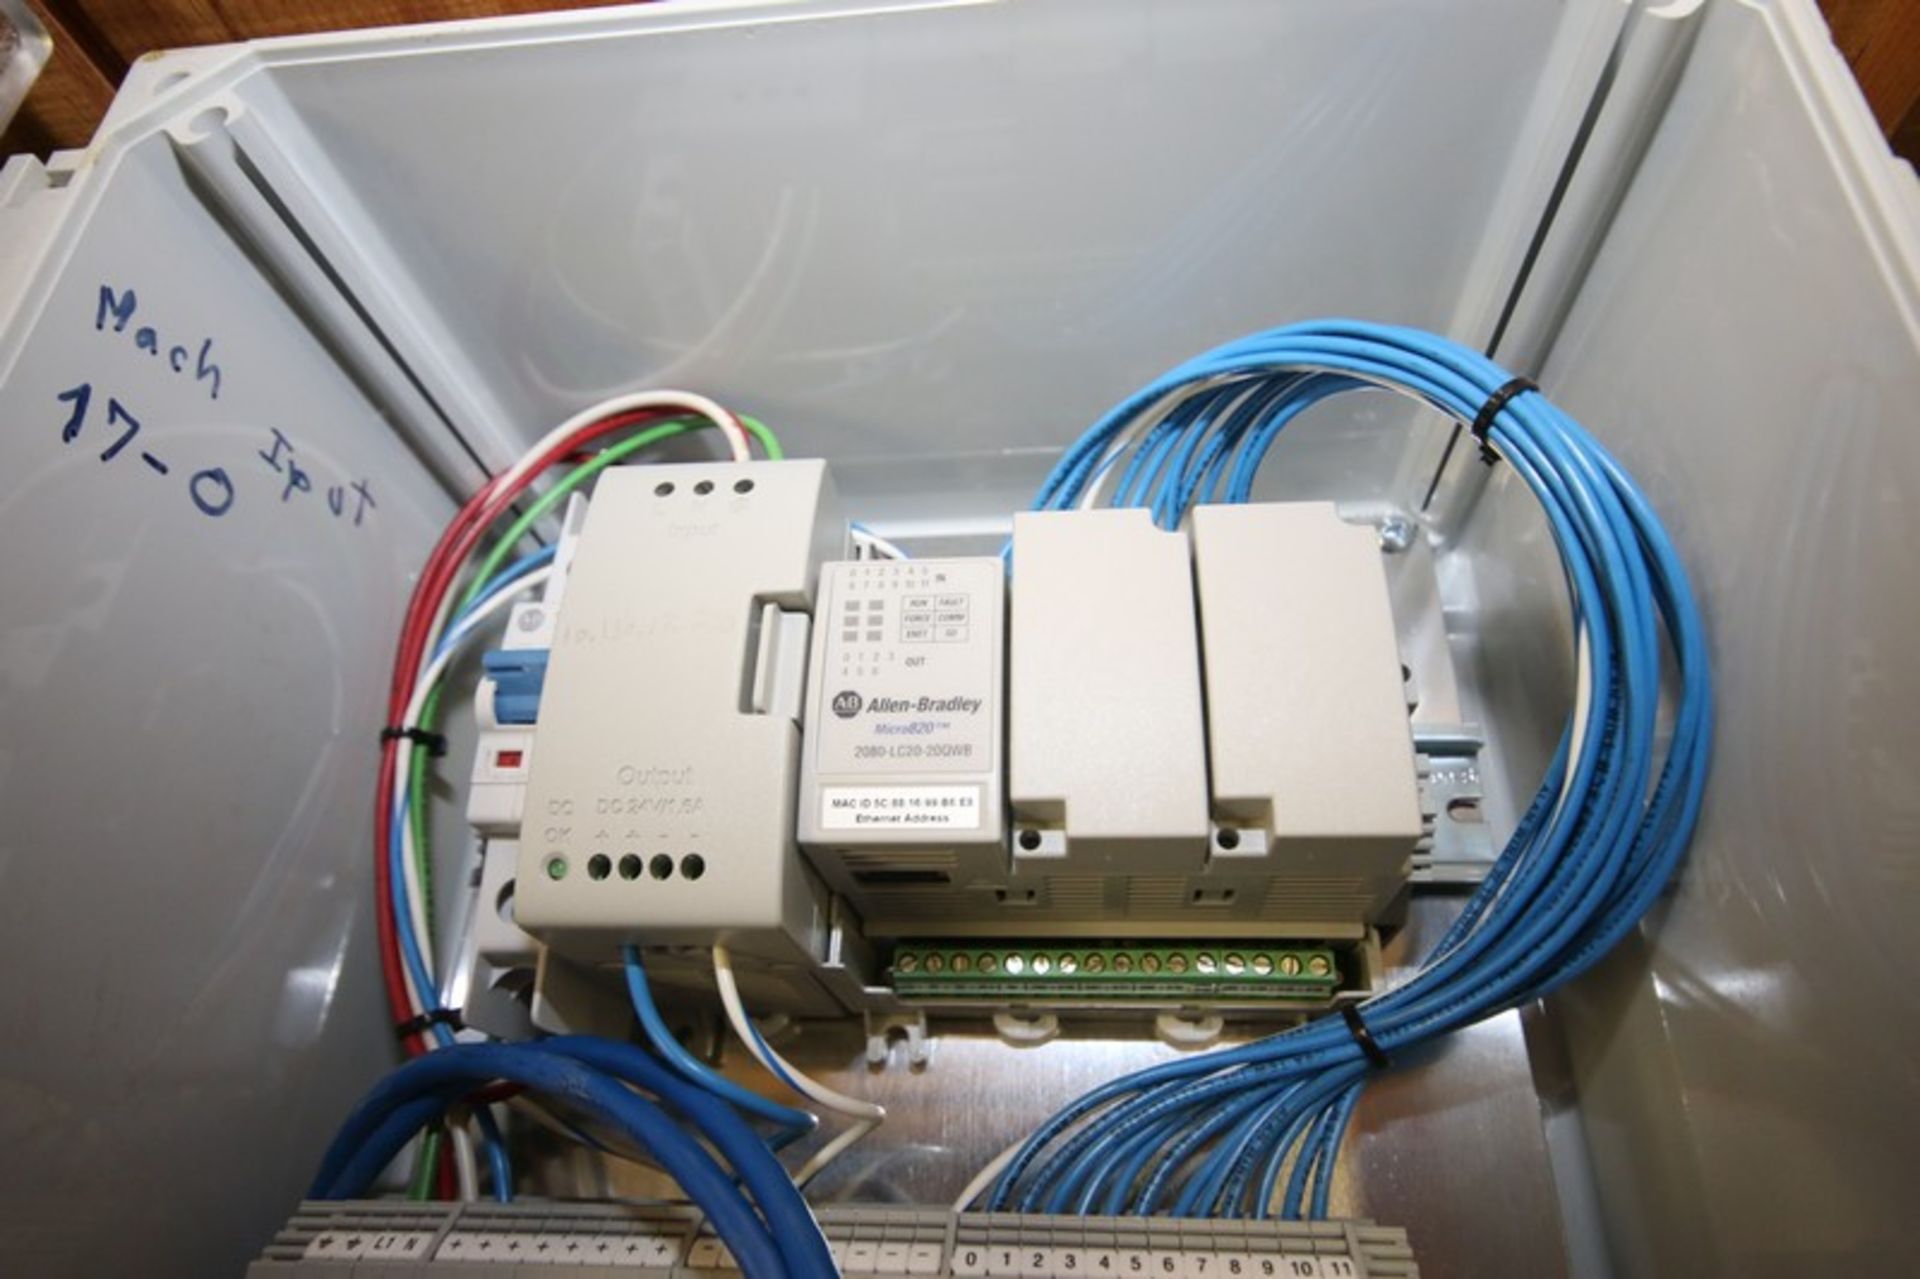 Lot of (3) Allen Bradley Micro 820 PLC Controllers No. 2080-LC20-20QWB, Mounted in 10" x 12" & 12" x - Image 7 of 7